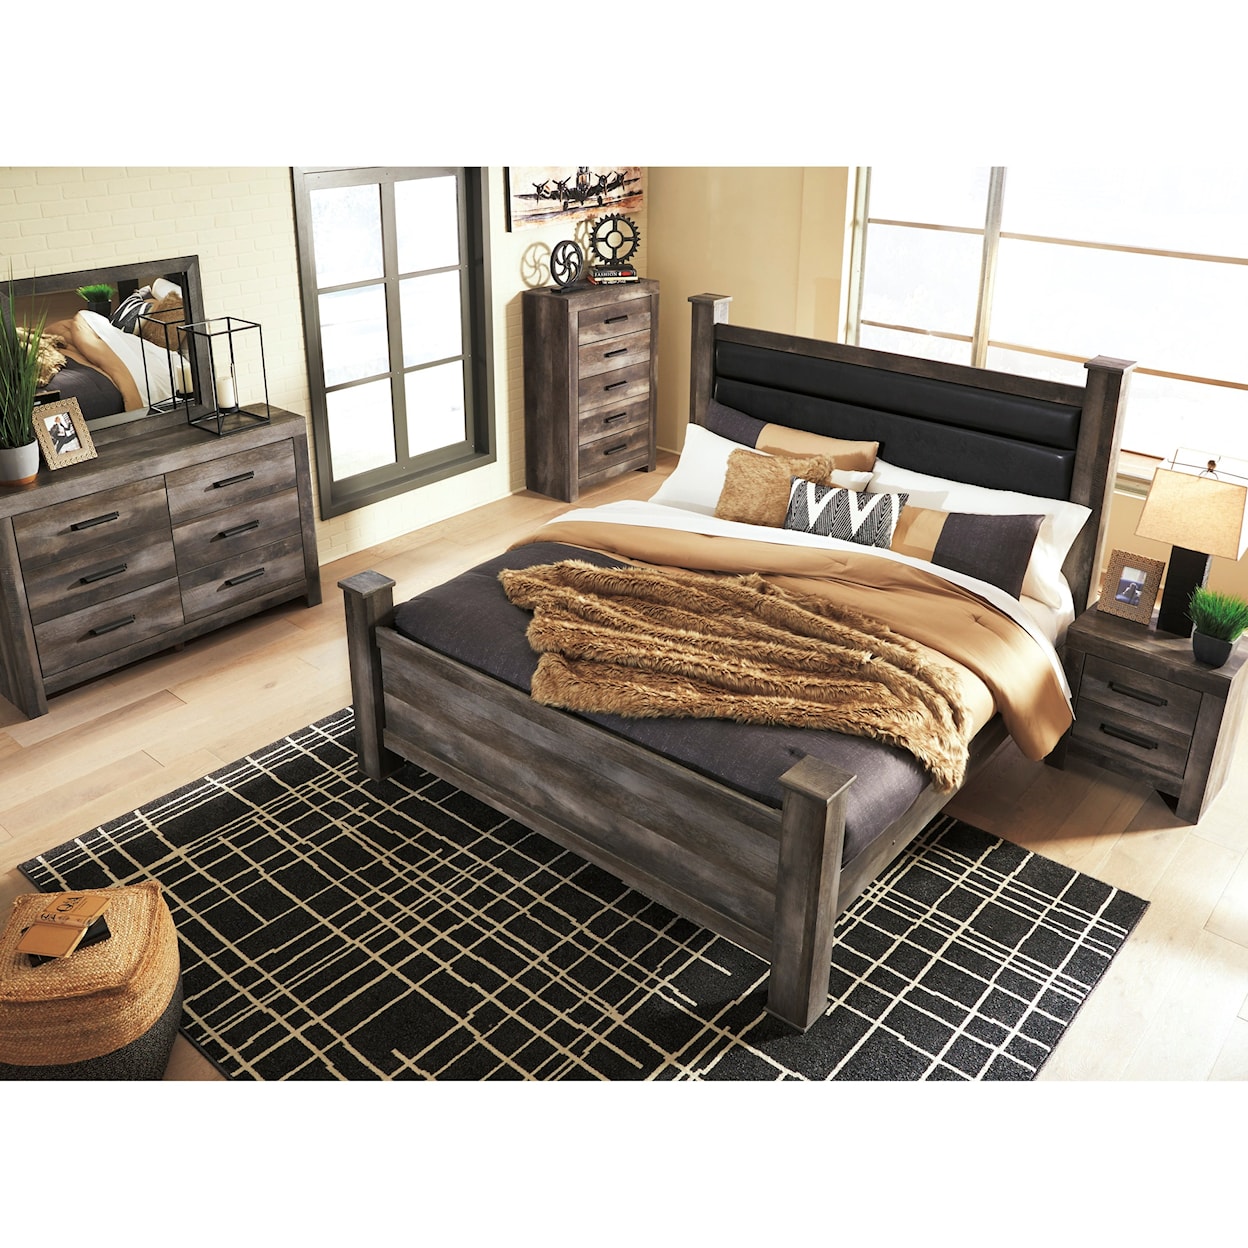 Ashley Furniture Signature Design Wynnlow King Poster Bed